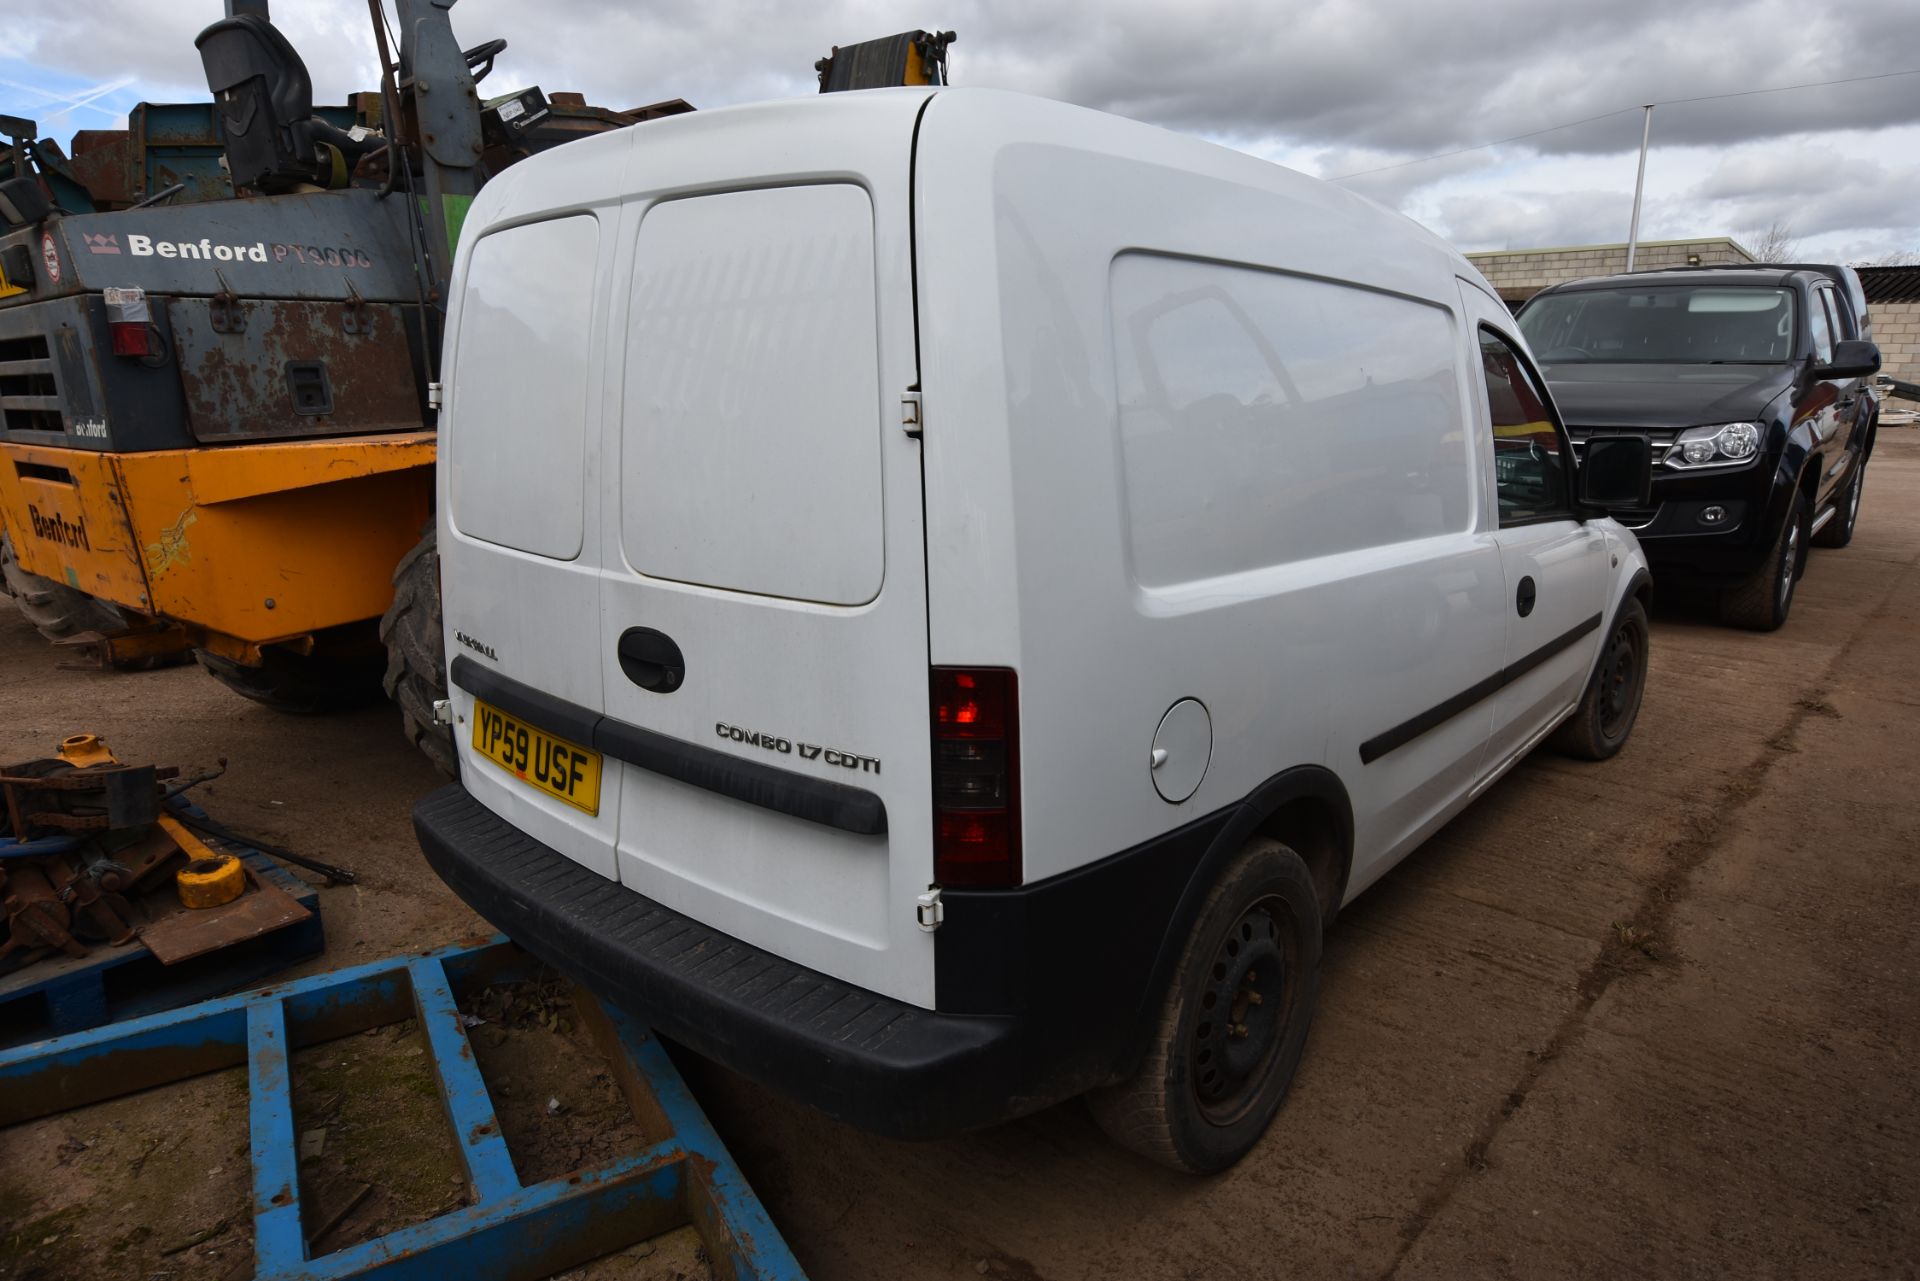 Vauxhall Combo 1.7CDTi Diesel Van, Registration Number: YP59USF, Date of Registration: - , Indicated - Image 3 of 4